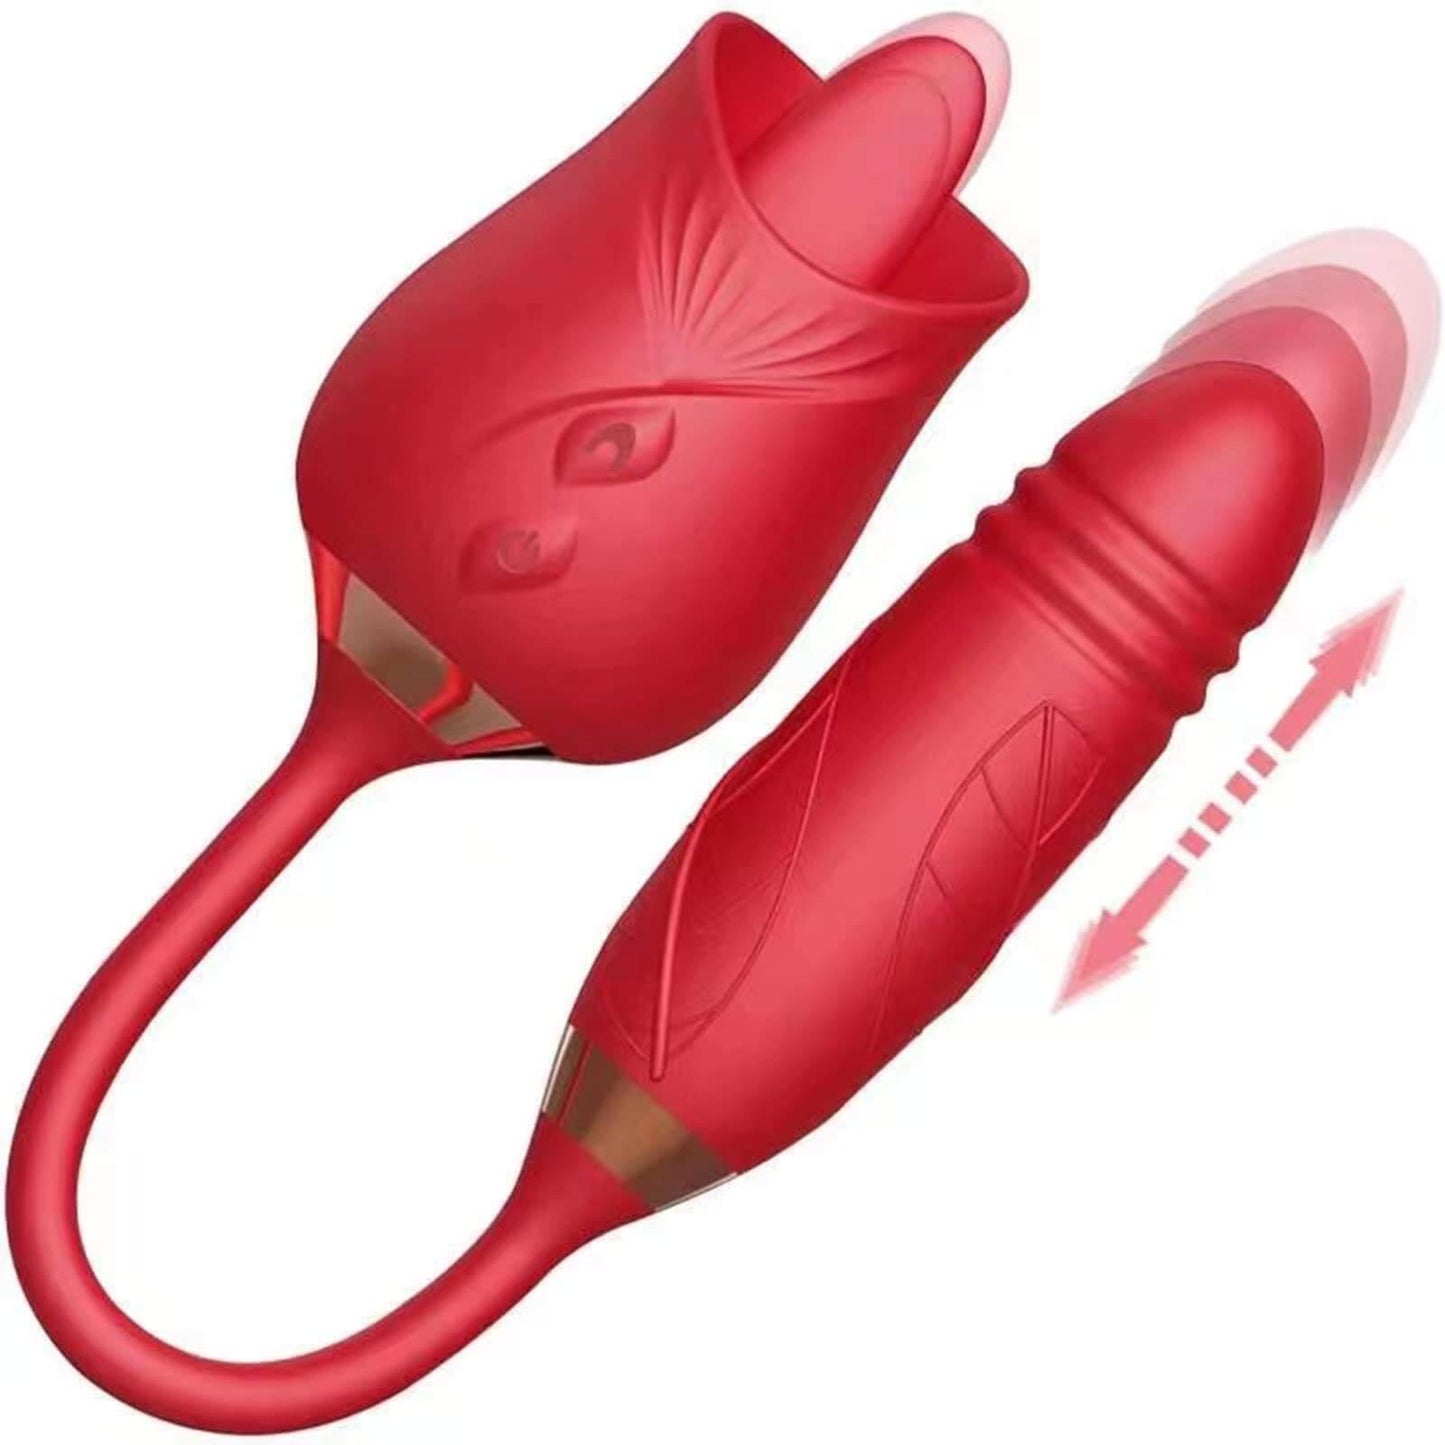 Tulip Toy for Women - Thrusting & Sucking Vibrator to get it all worked out! The Pleaser Pro